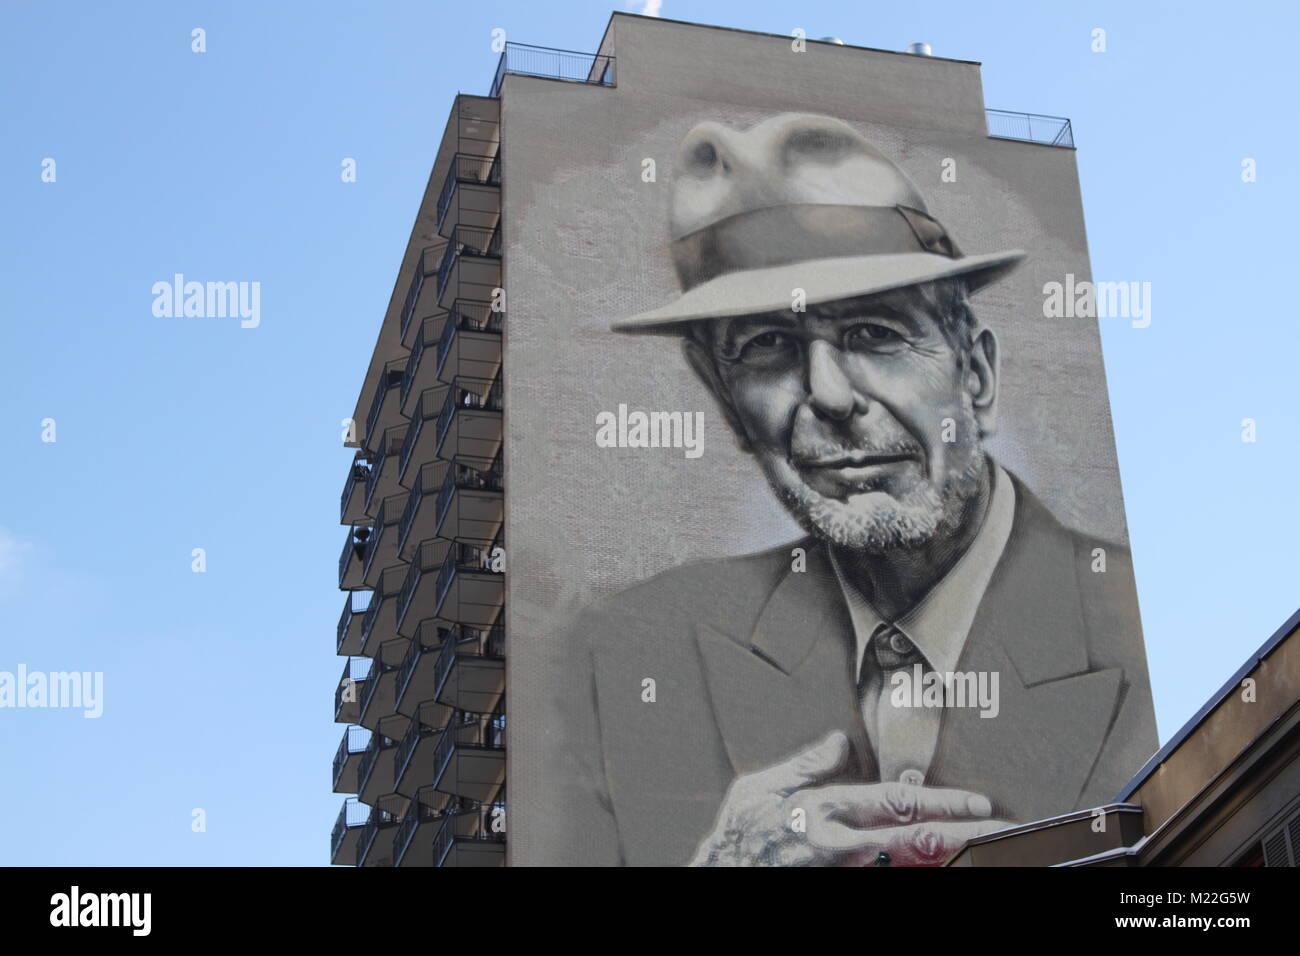 Leonard Cohen image on a building in Montreal on December 16, 2017 Stock Photo